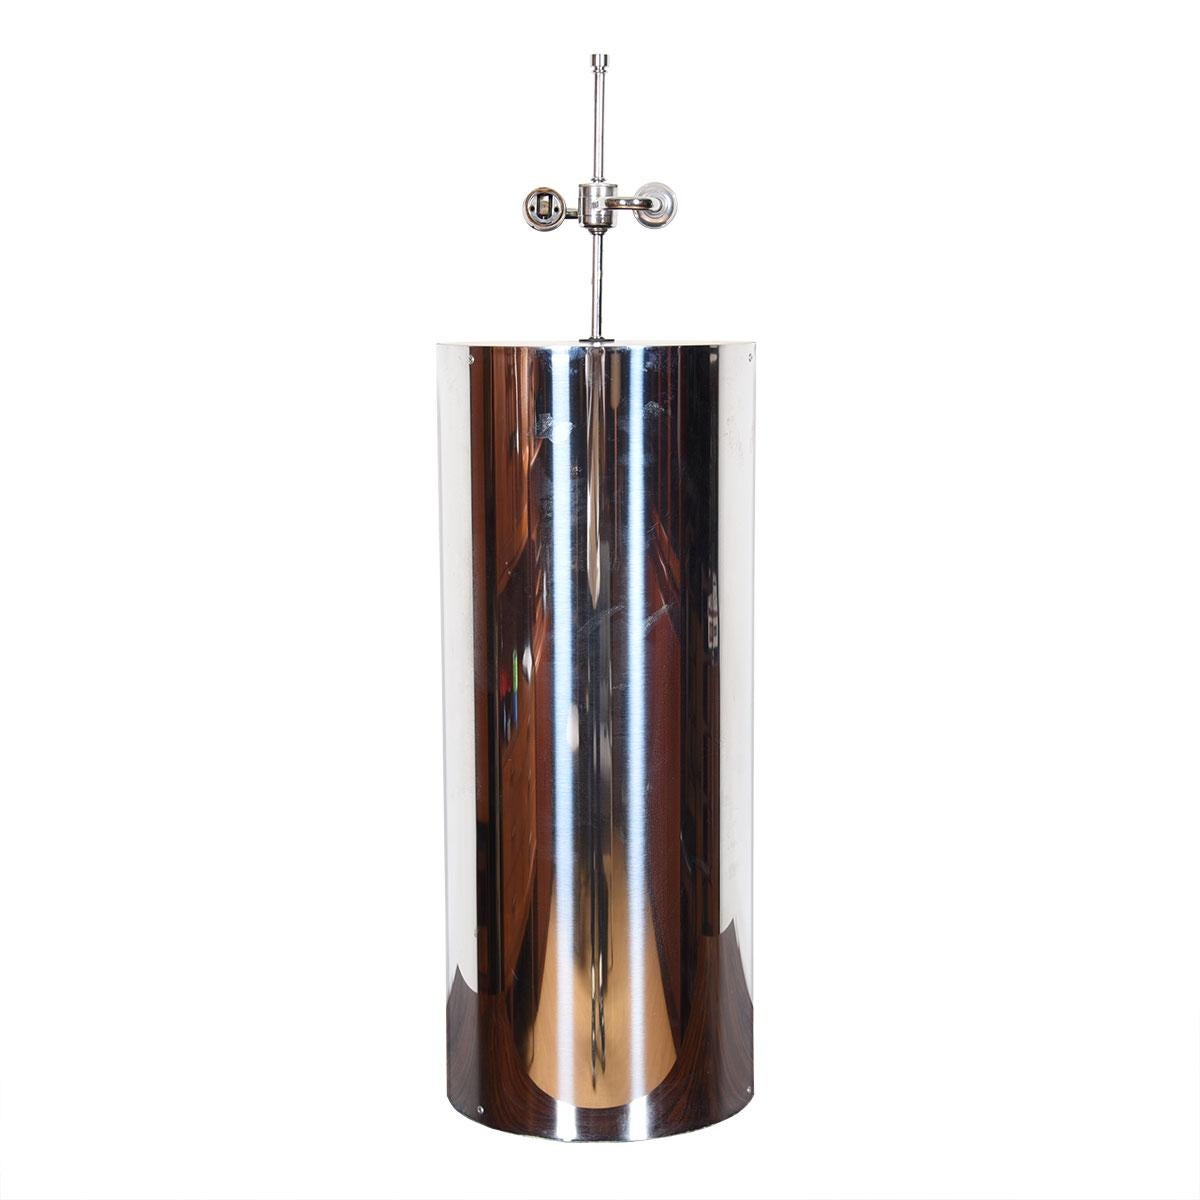 Dress your room up with this large chrome lamp from respected manufacturer Kovacs. Statement piece lamp from the 70s will lend a disco vibe to your space. Chunky like women’s jewelry from this period!
Use by itself or with its coppery little